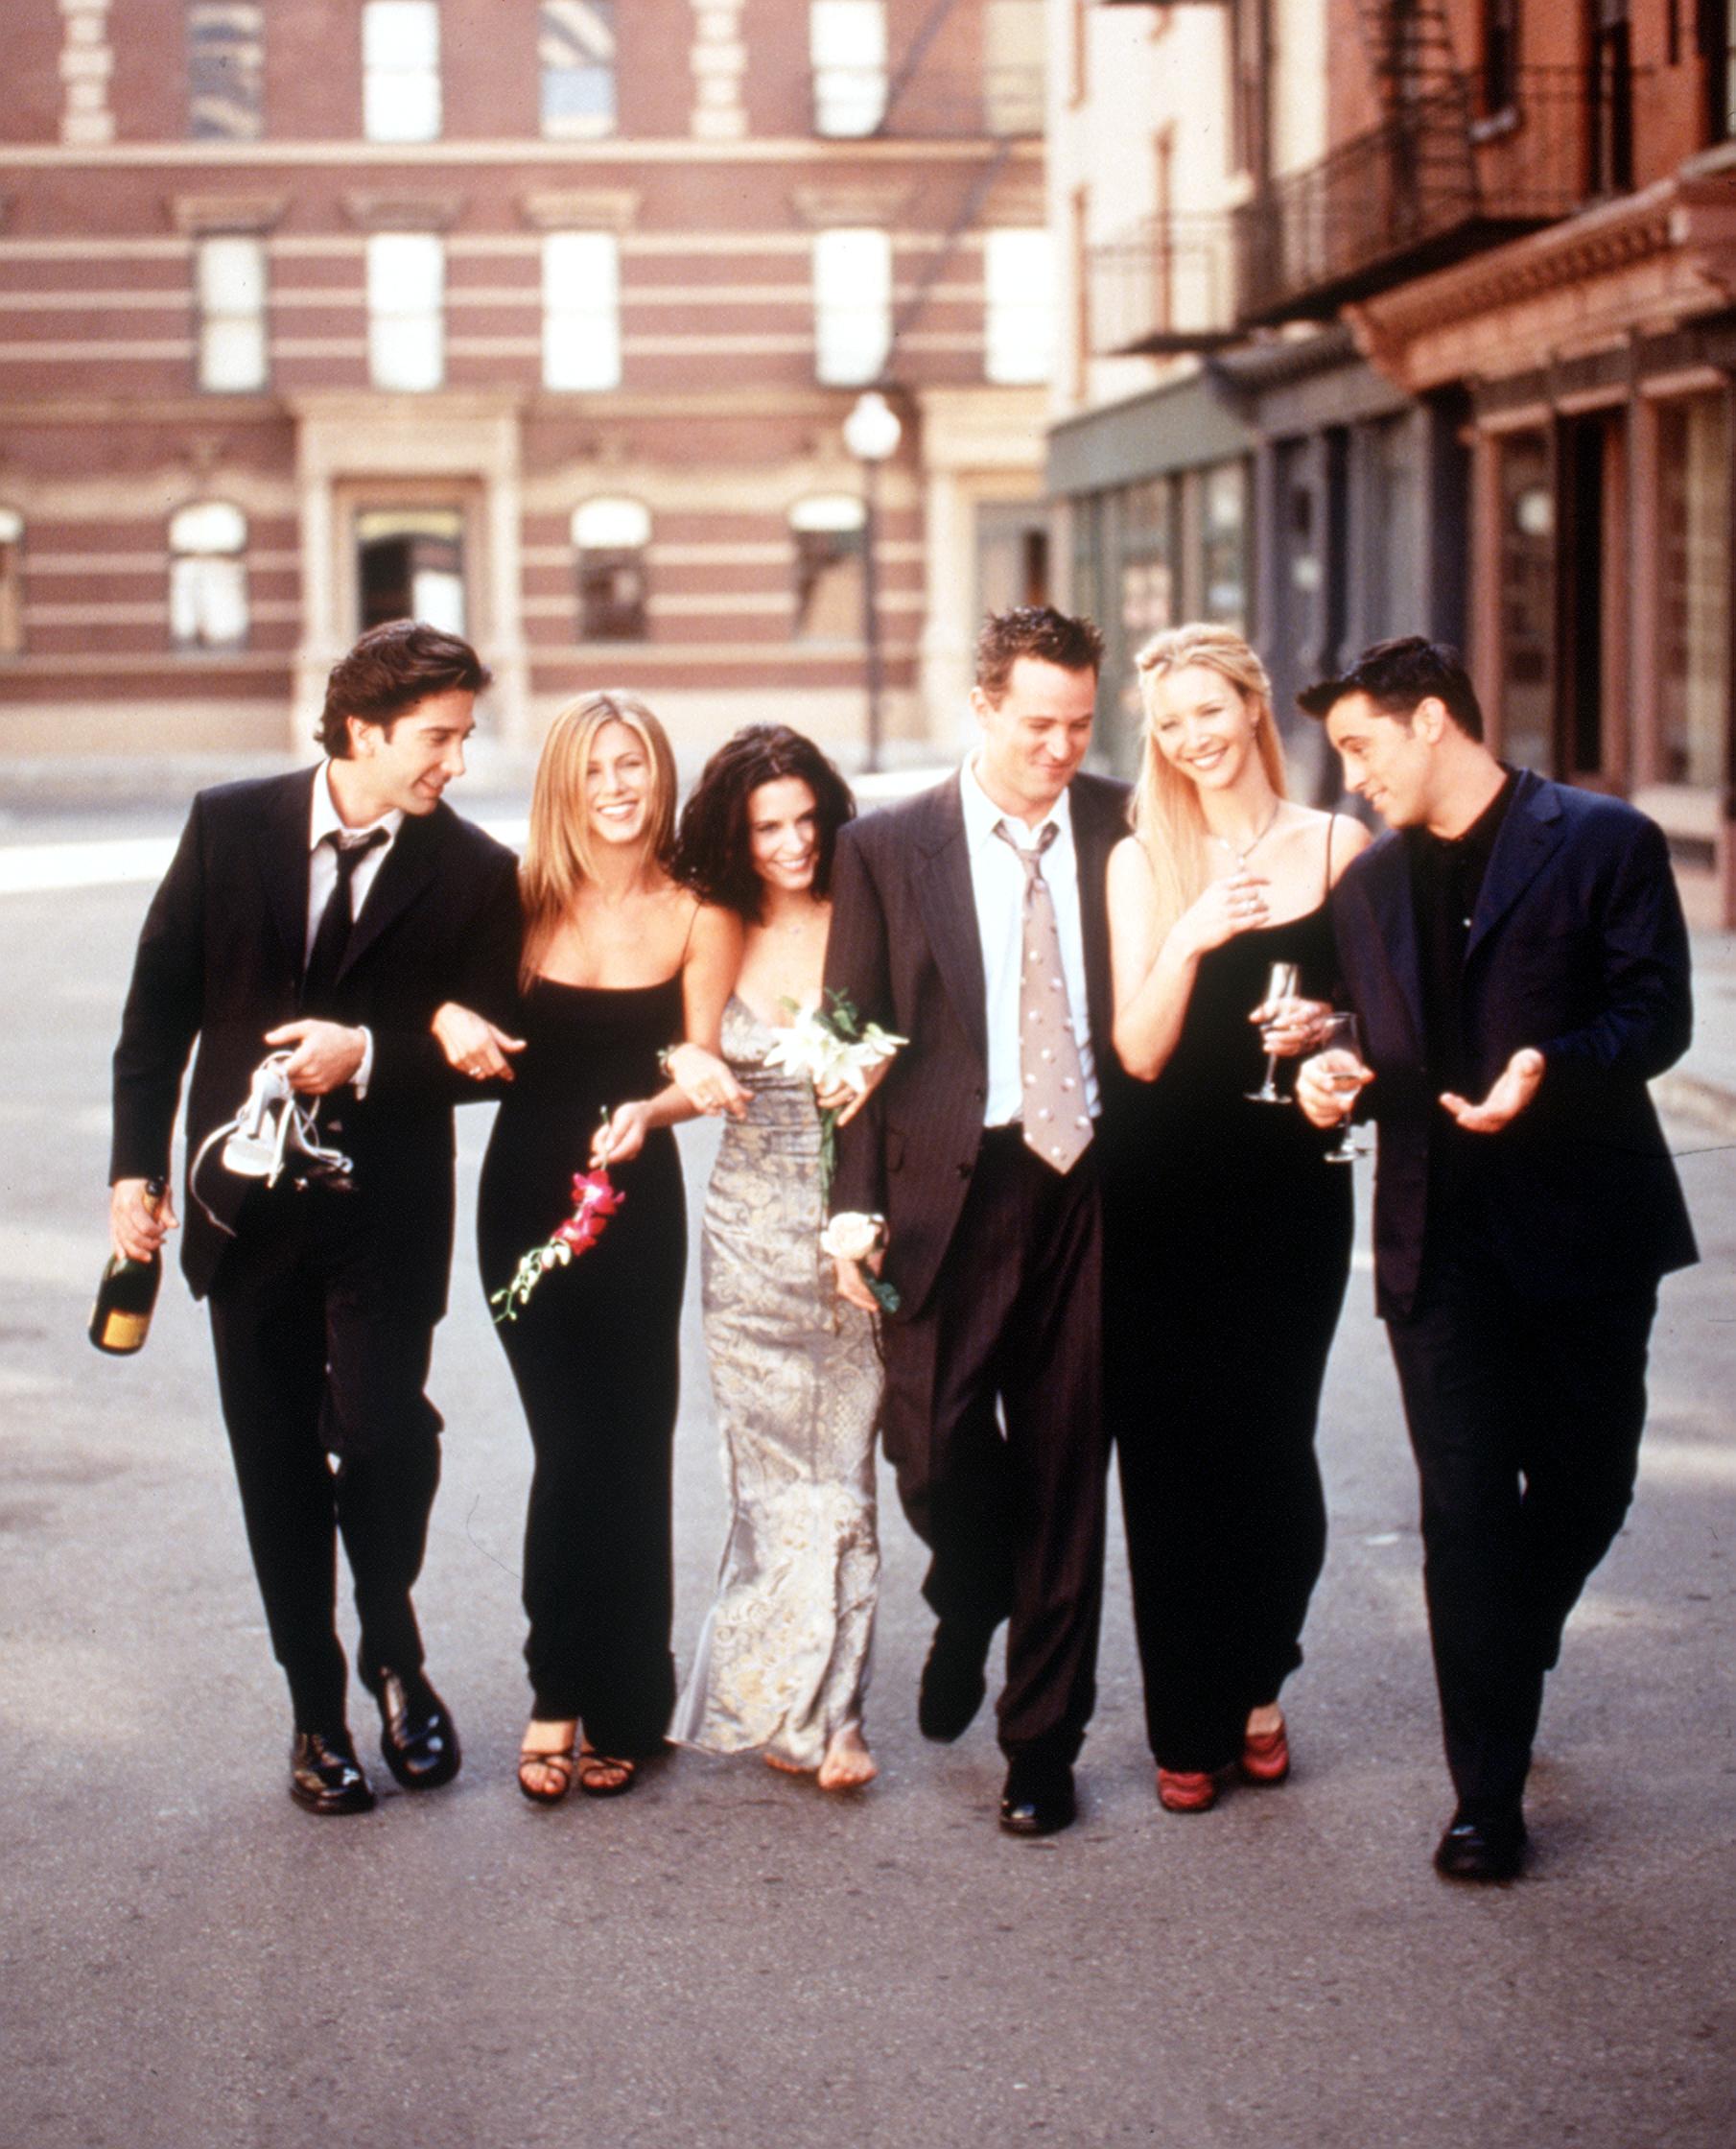 The cast of "Friends" take a photo together on October 20, 1999 | Photo: Getty Images